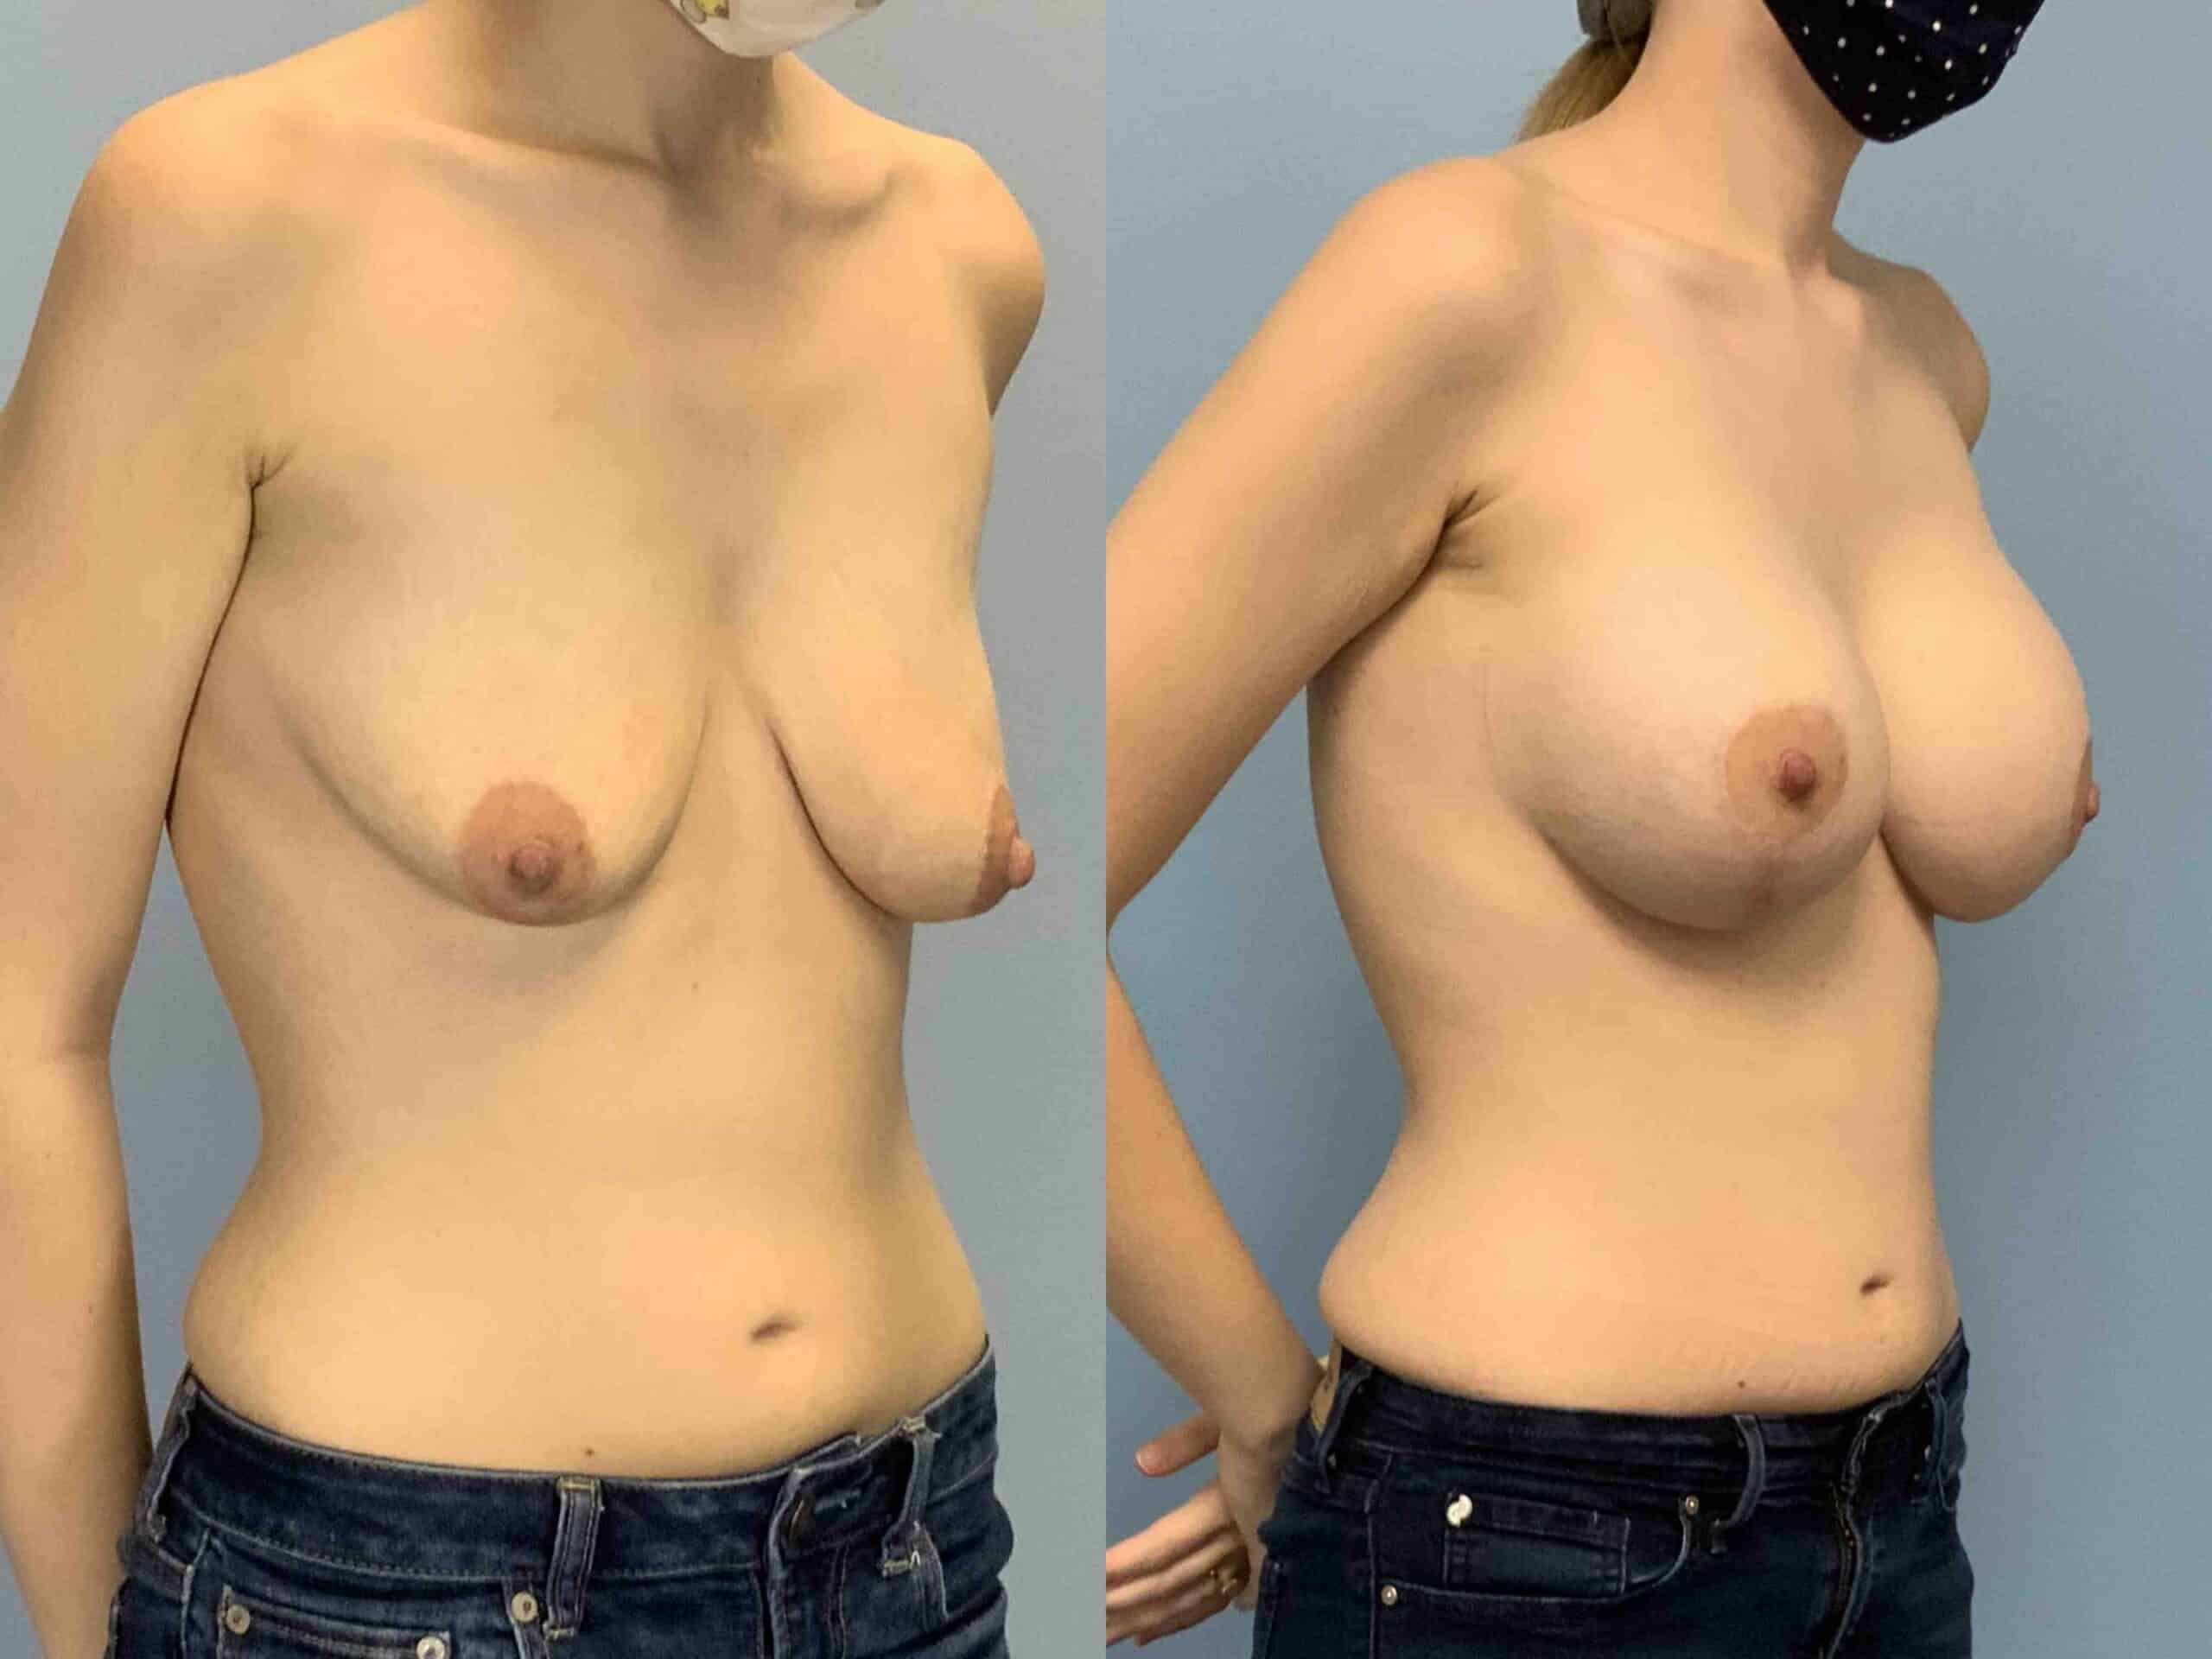 Before and after, 7 mo post op from Breast Augmentation, Strattice, Breast Lift/Mastopexy, performed by Dr. Paul Vanek (diagonal view)